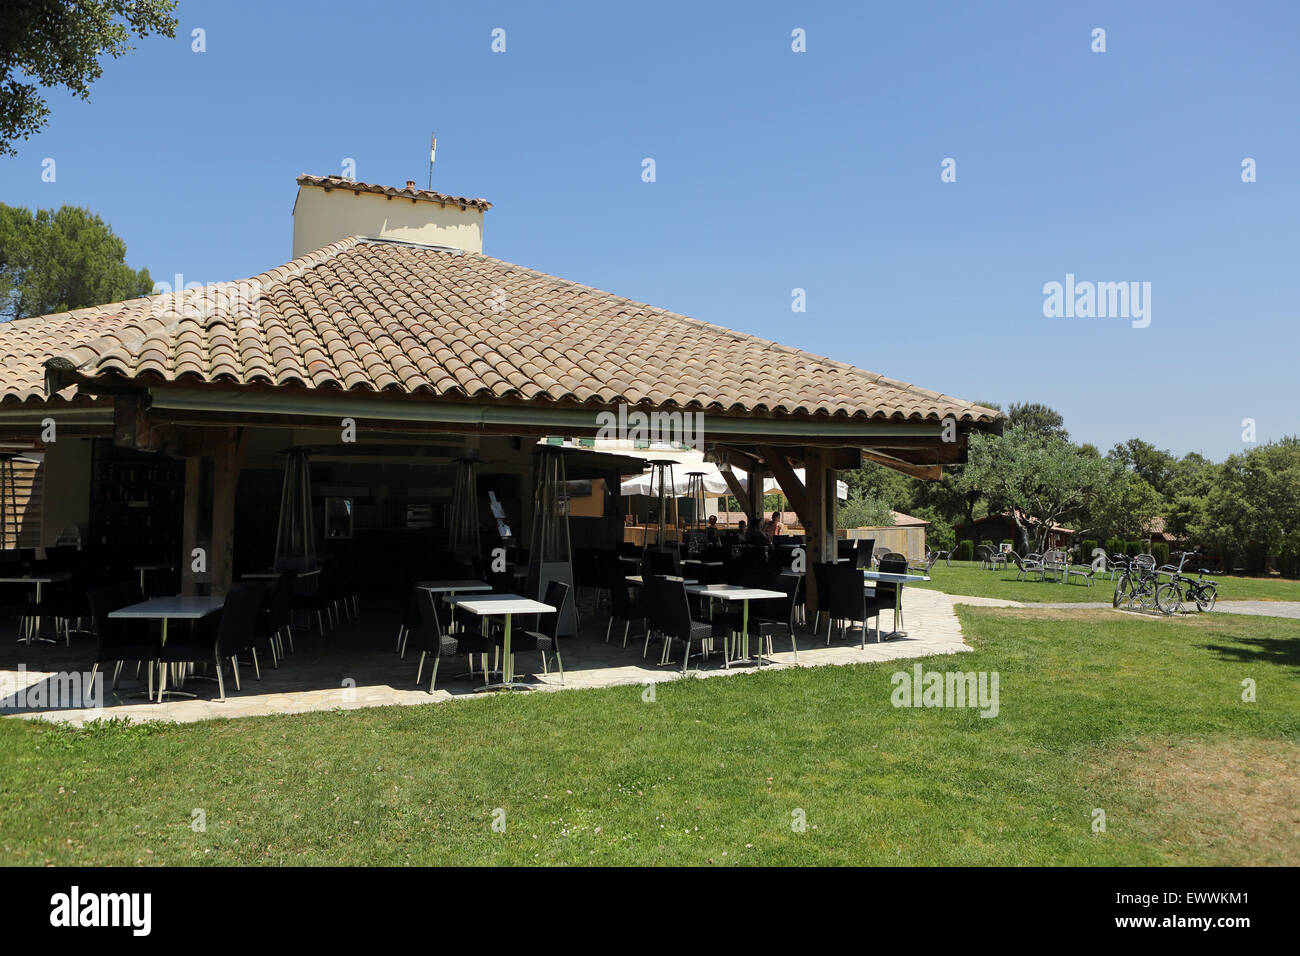 The restaurant at the Domaine de Massereau campsite in Sommieres, France. Stock Photo